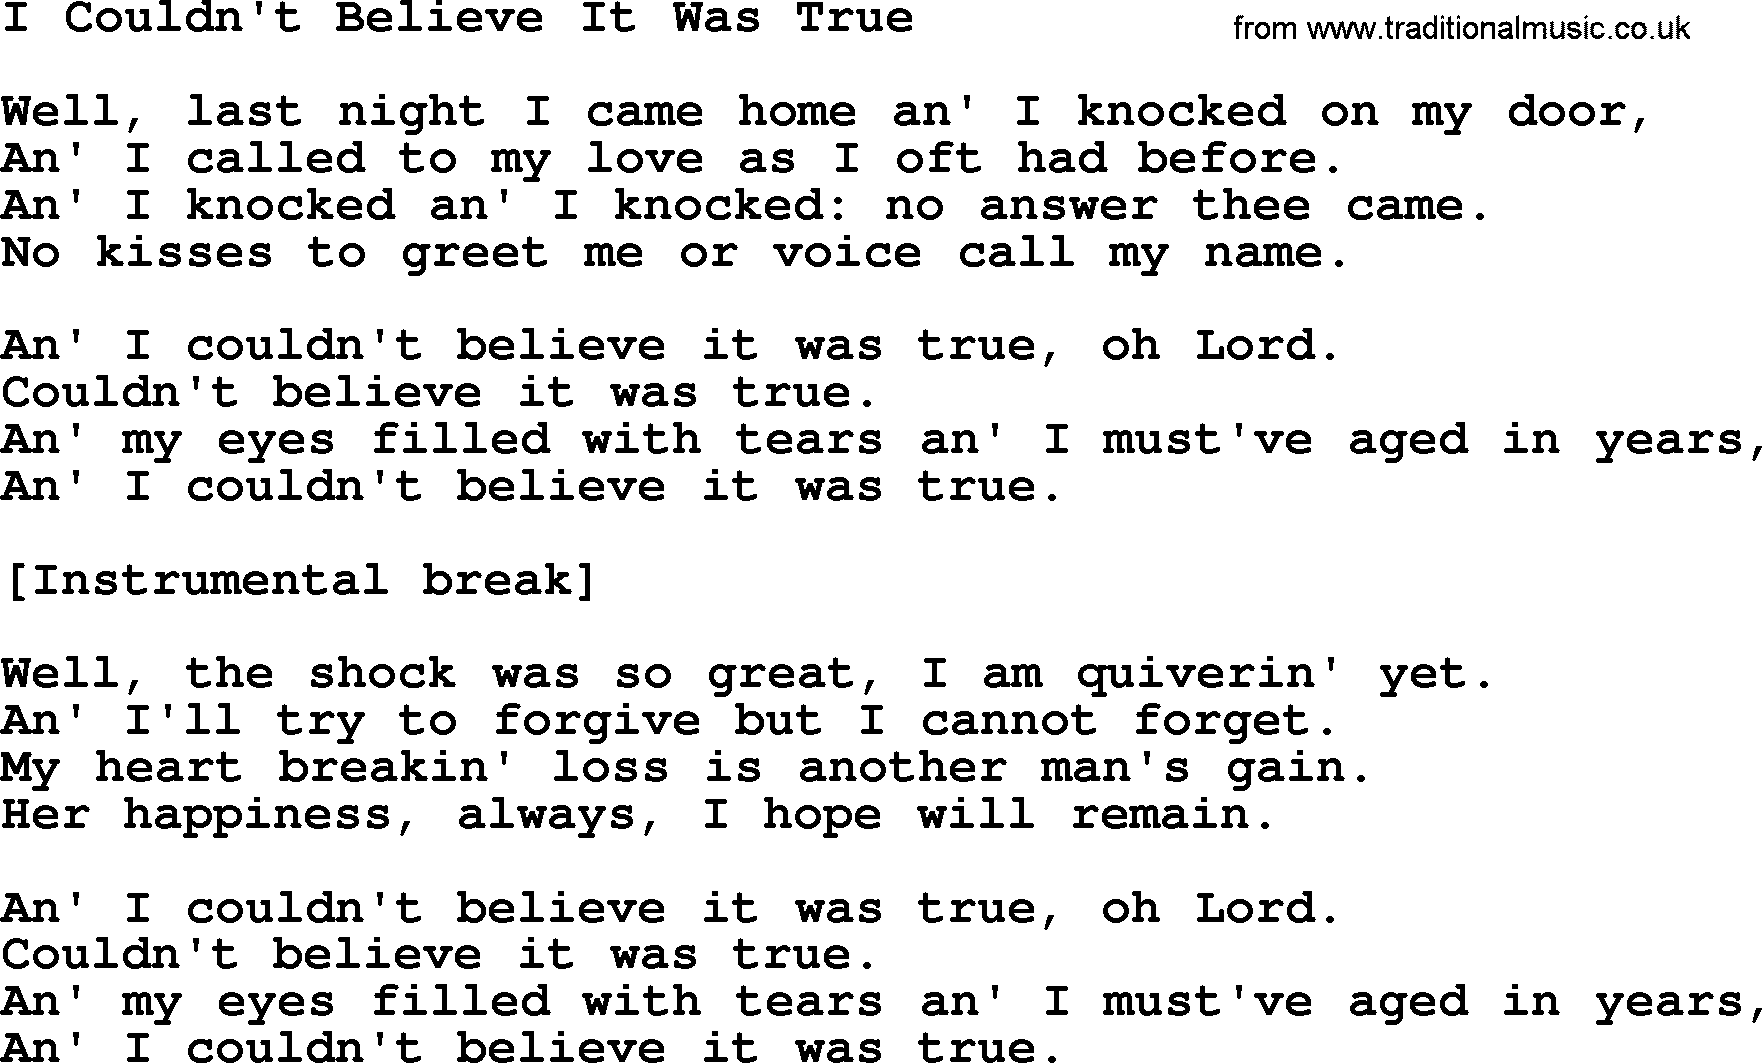 Willie Nelson song: I Couldn't Believe It Was True lyrics